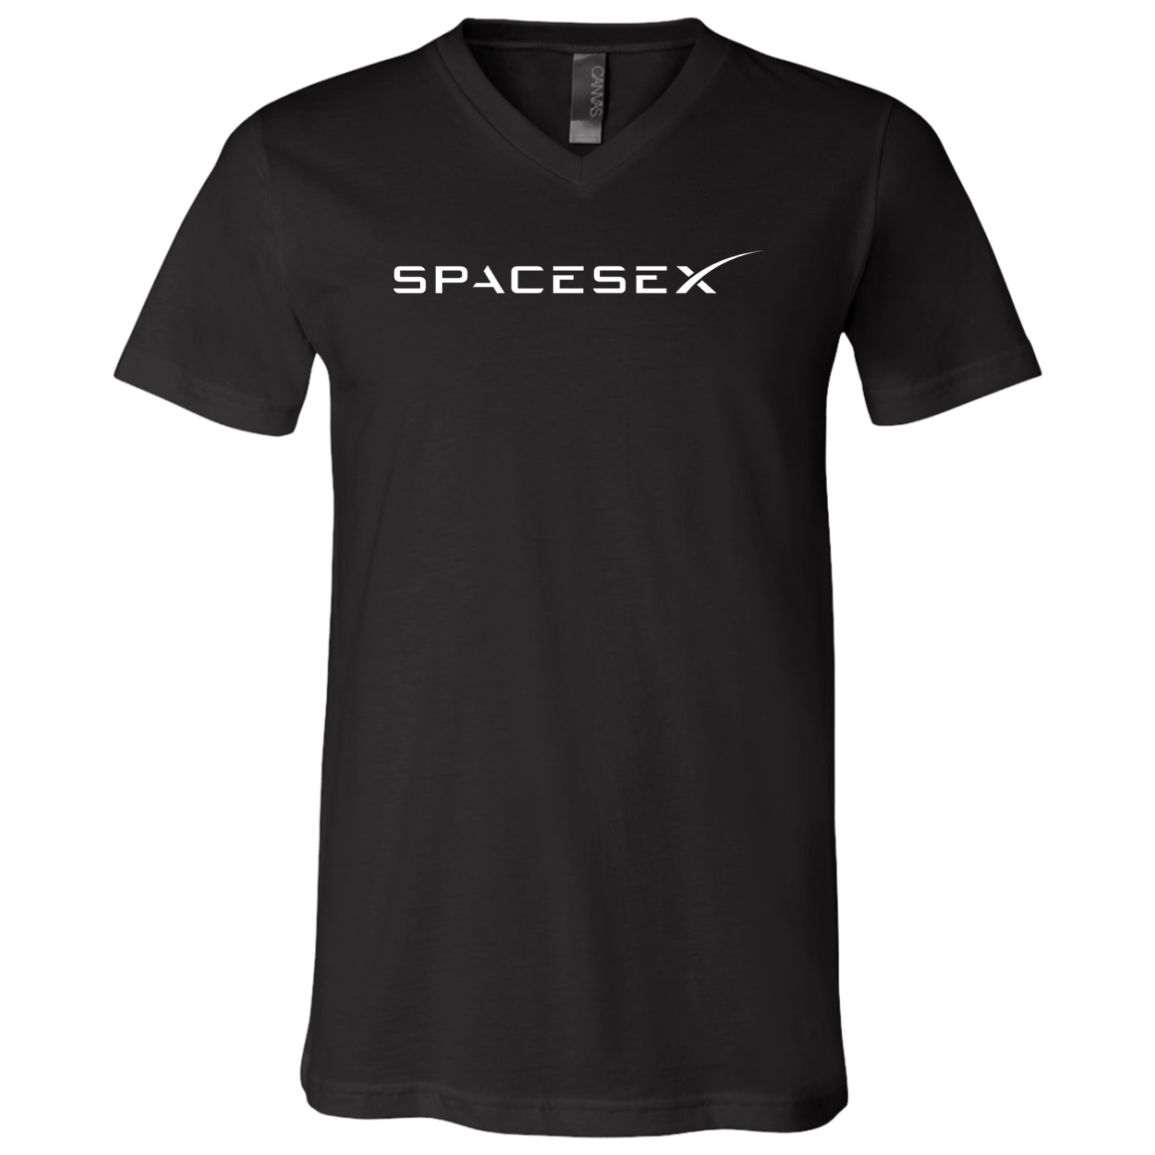 "SpaceseX" Unisex Jersey SS V-Neck T-Shirt